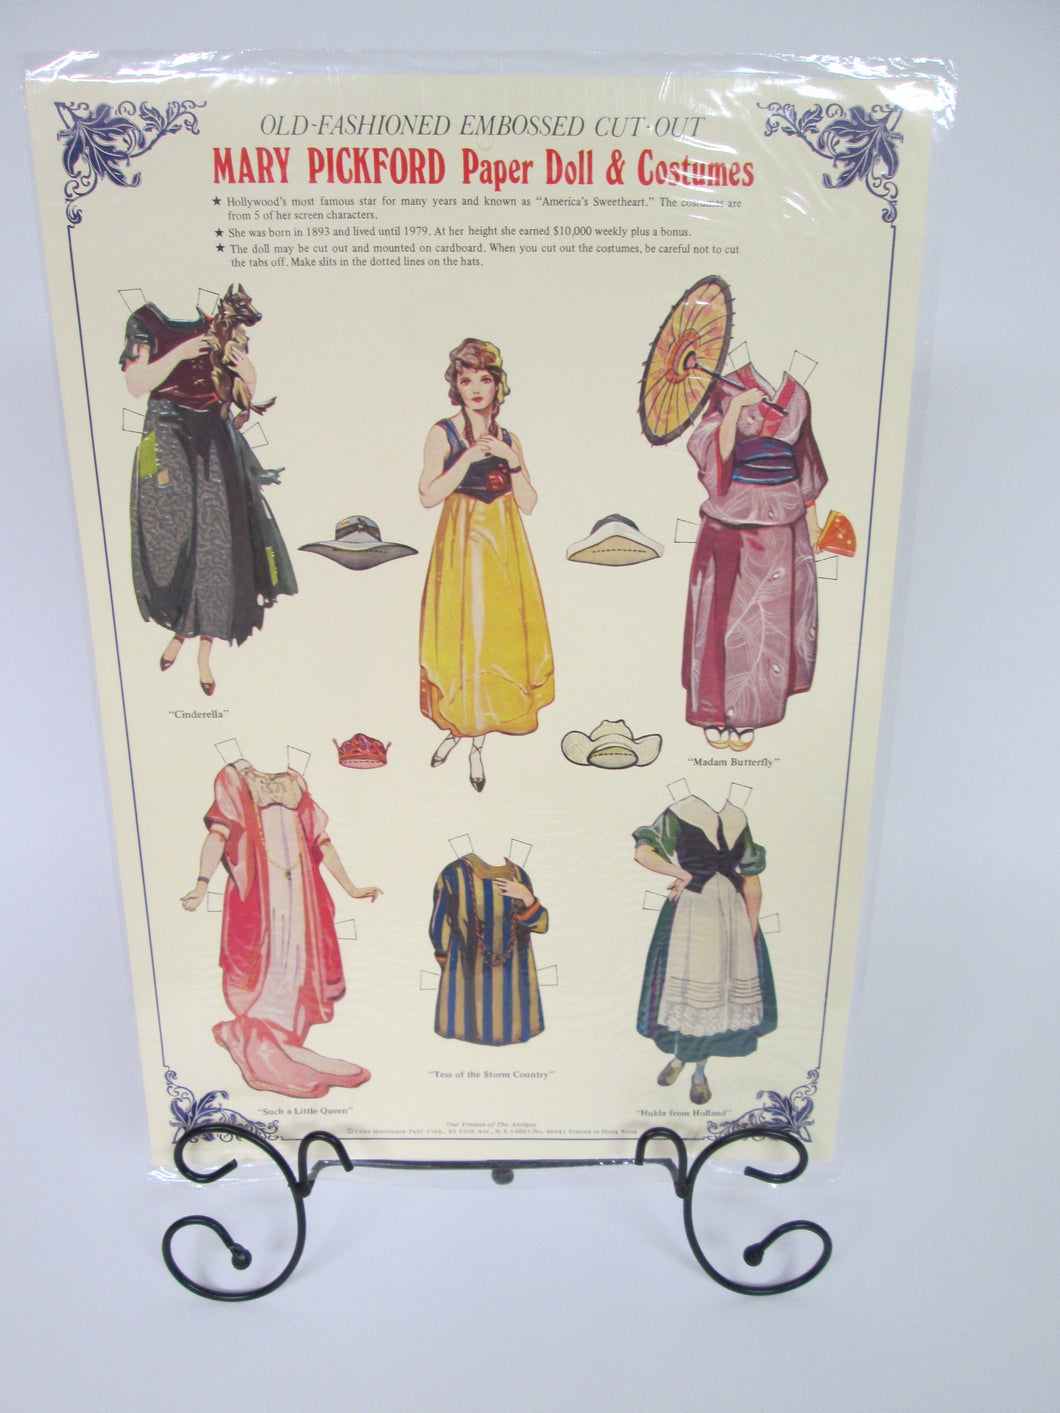 Old Fashioned Embossed Cut-Out Mary Pickford Paper Doll and Costumes Sheet